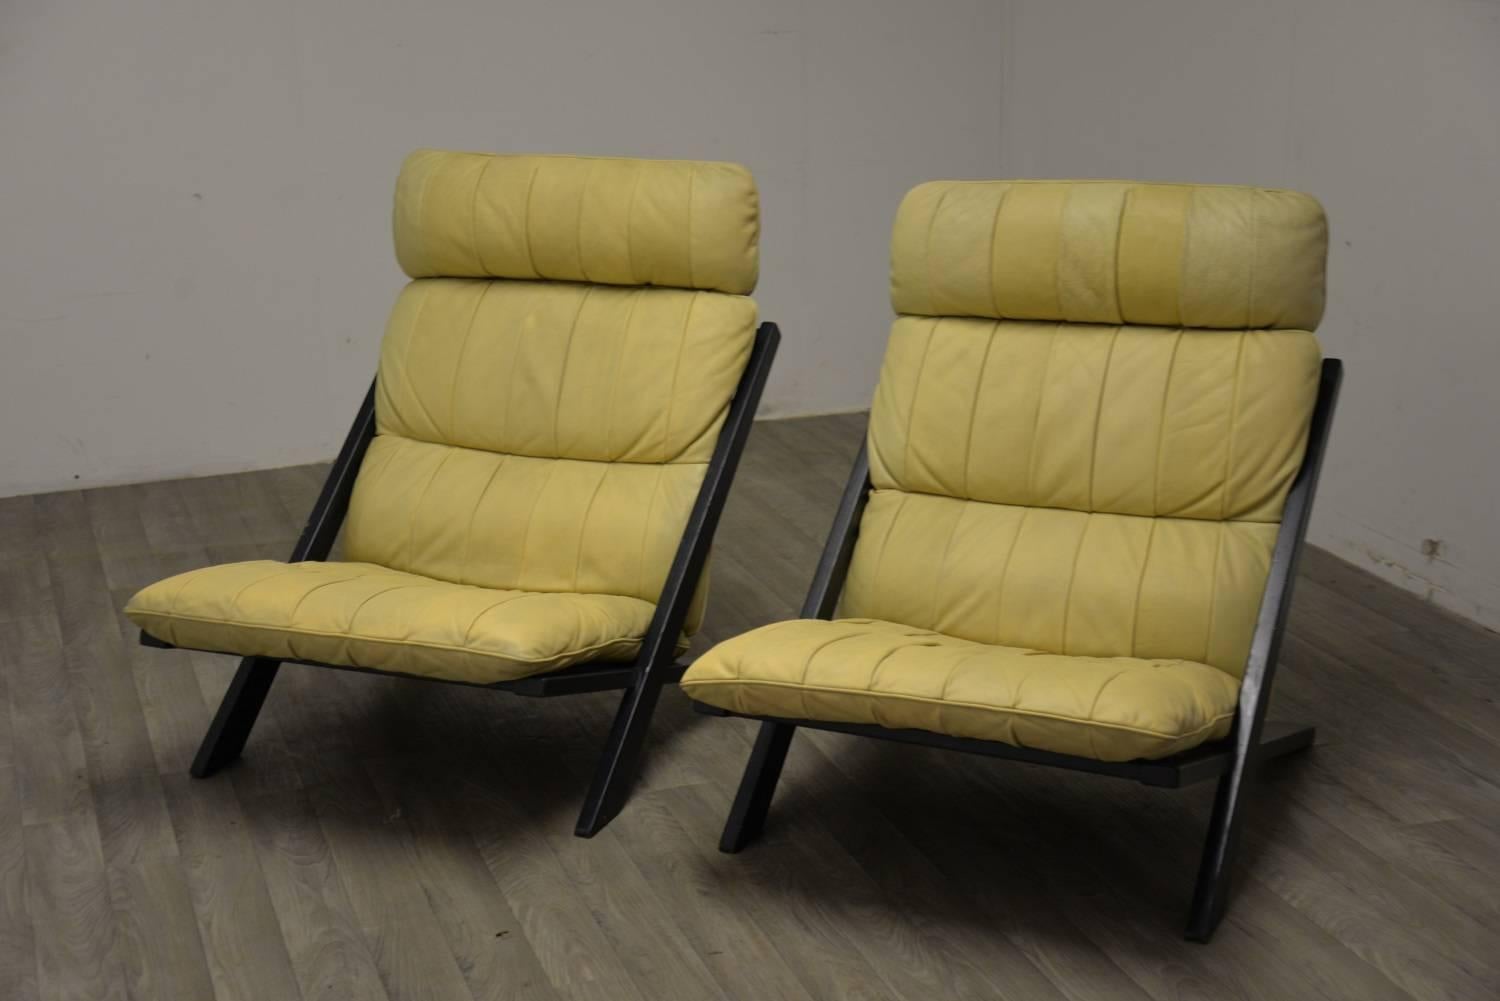 Discounted airfreight for our US and International customers ( from 2 weeks door to door)

We are delighted to bring to you an original patchwork leather lounge chair by Ueli Berger for De Sede of Switzerland, 1970`s. Standing on a black lacquered